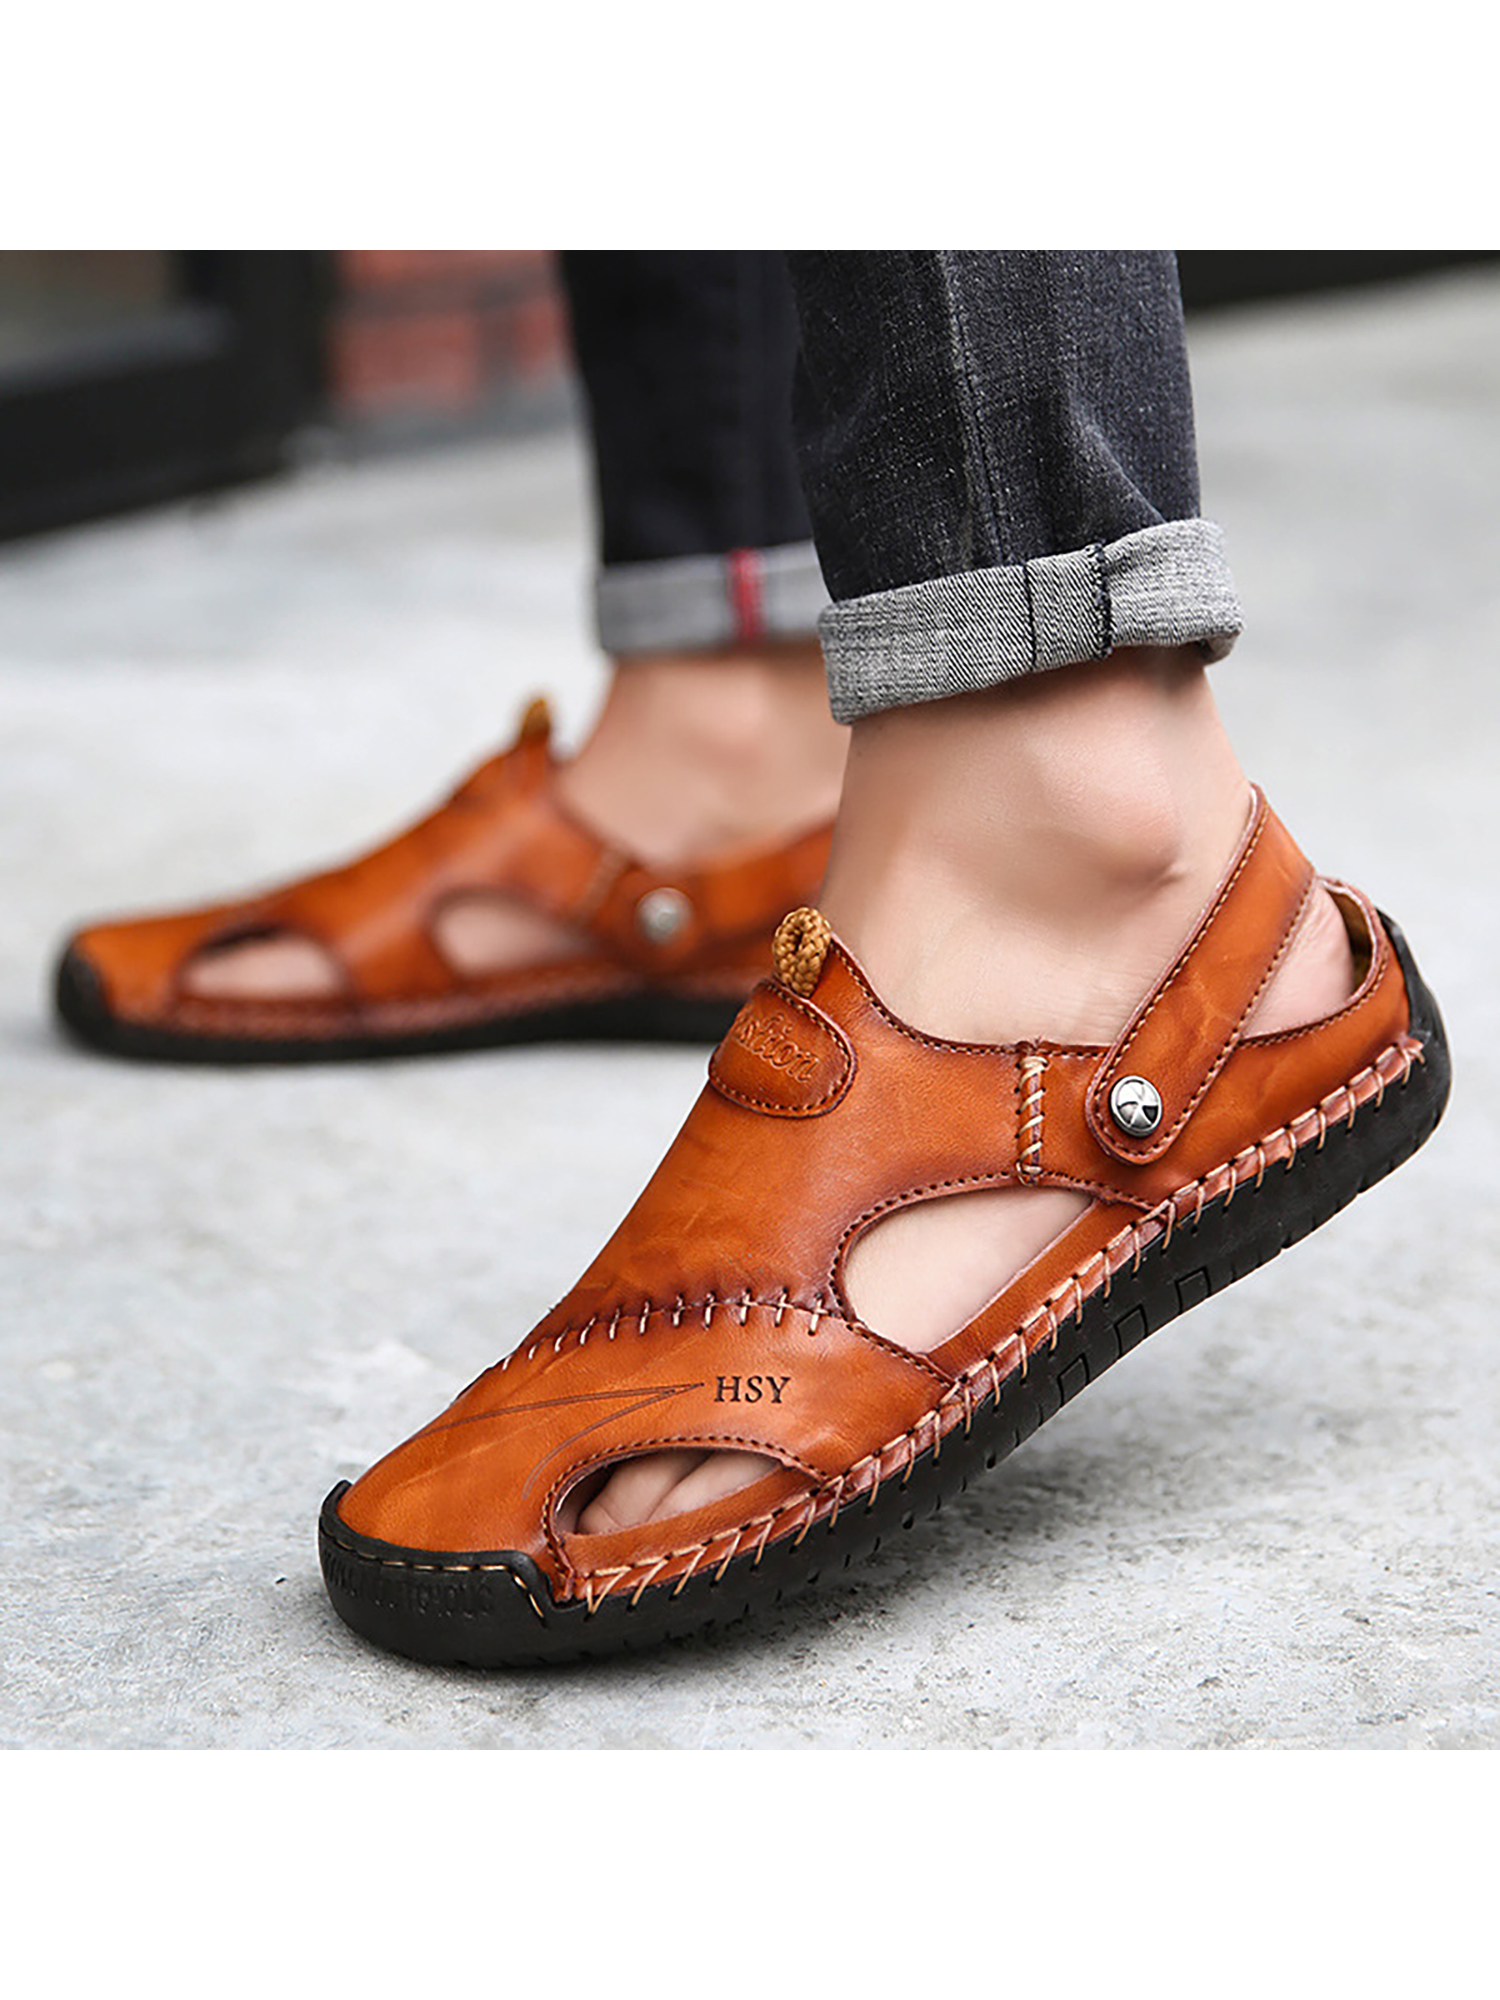 Frontwalk Mens Summer Sandals Casual Leather Shoes Outdoor Beach Breathable Casual Shoes - image 4 of 5